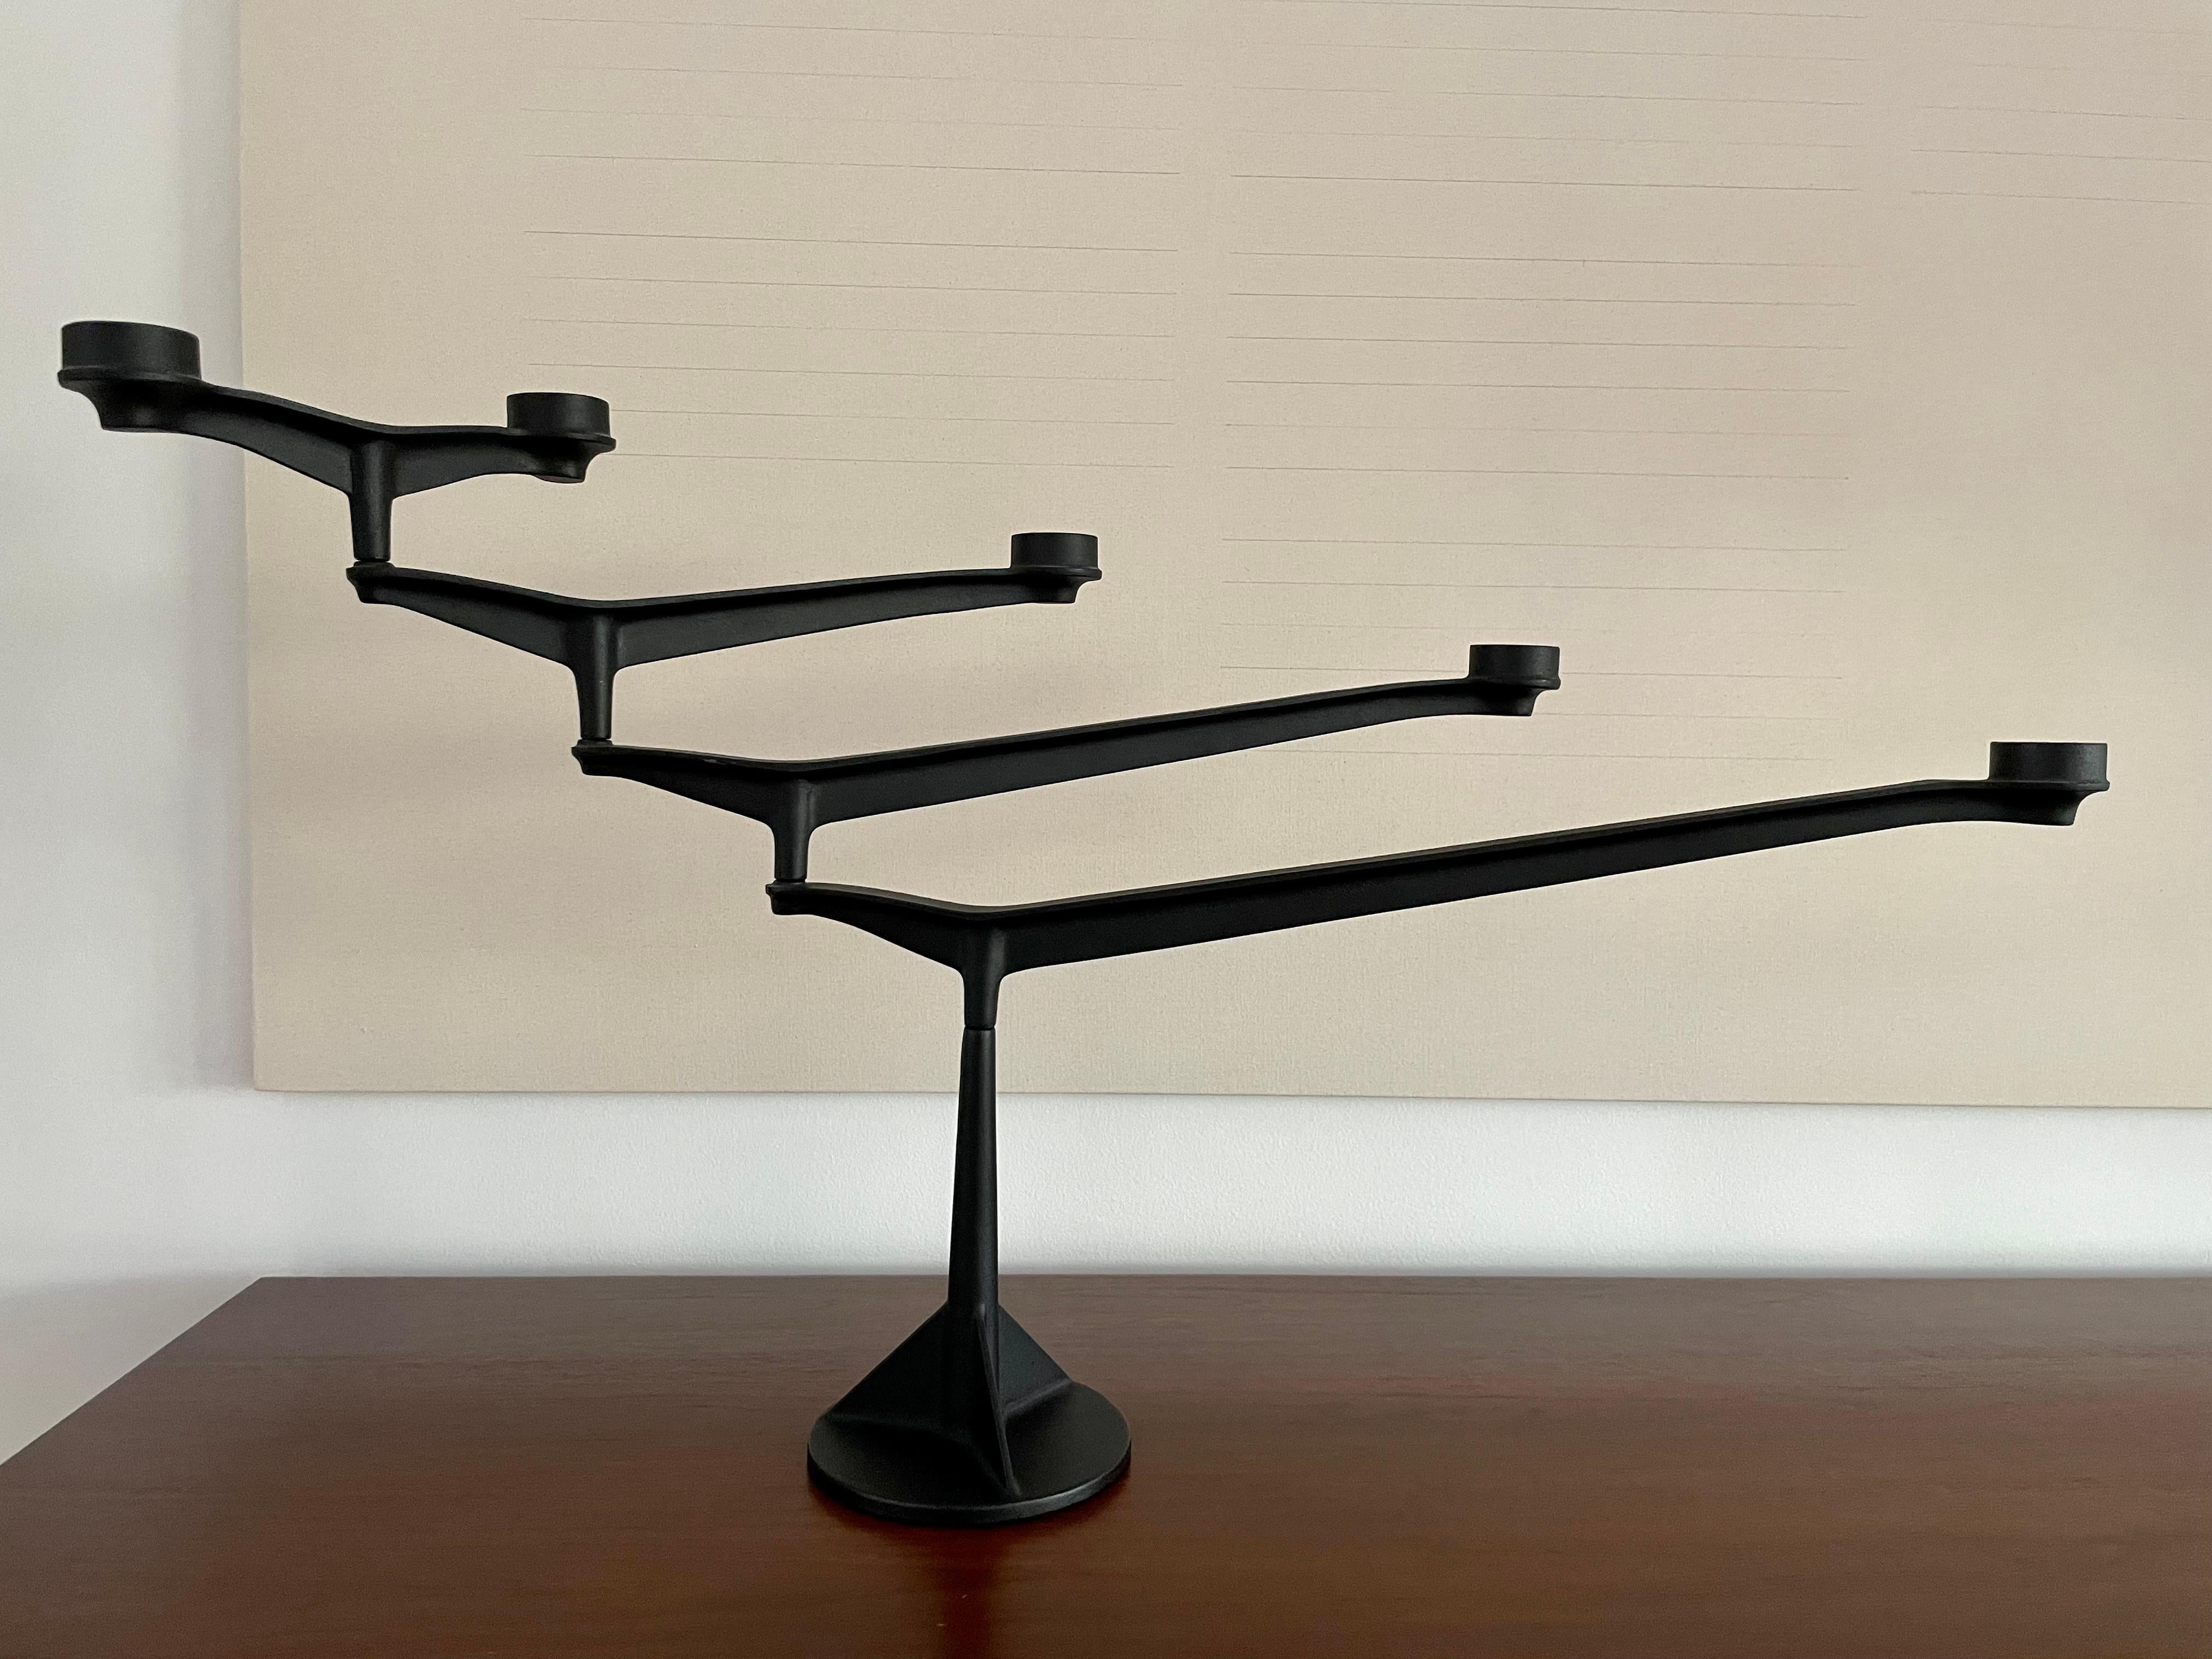 Metalwork Spin Large Iron Candelabra by Tom Dixon